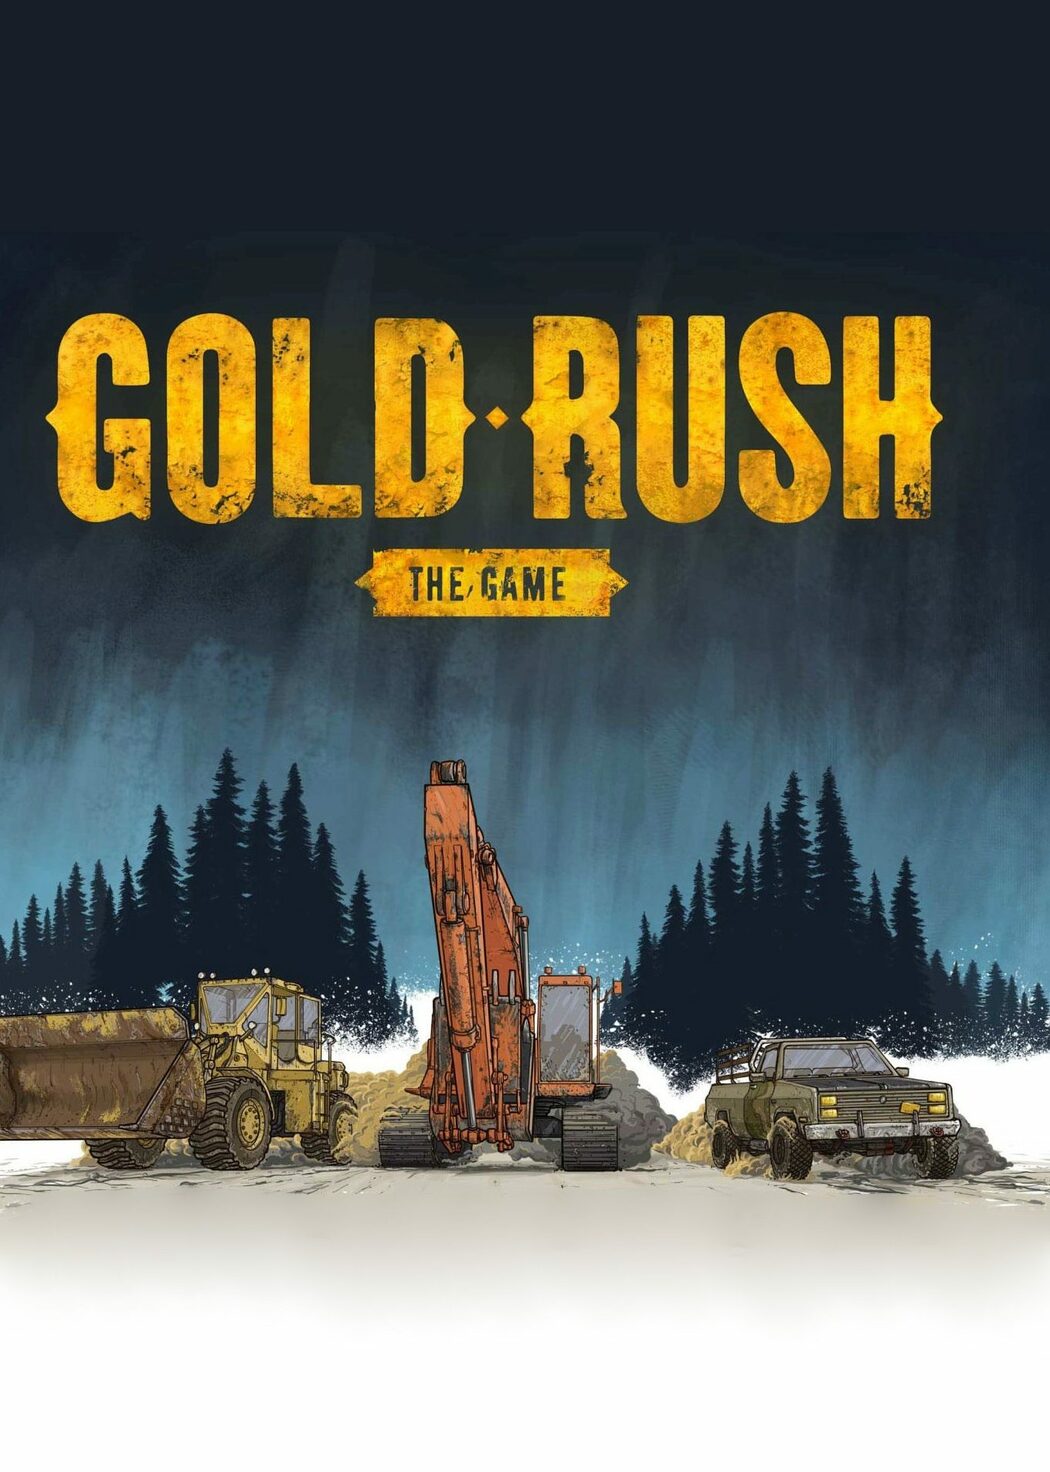 Gold Rush: The Game - Collector's Edition Upgrade (DLC) Steam Key GLOBAL | ENEBA